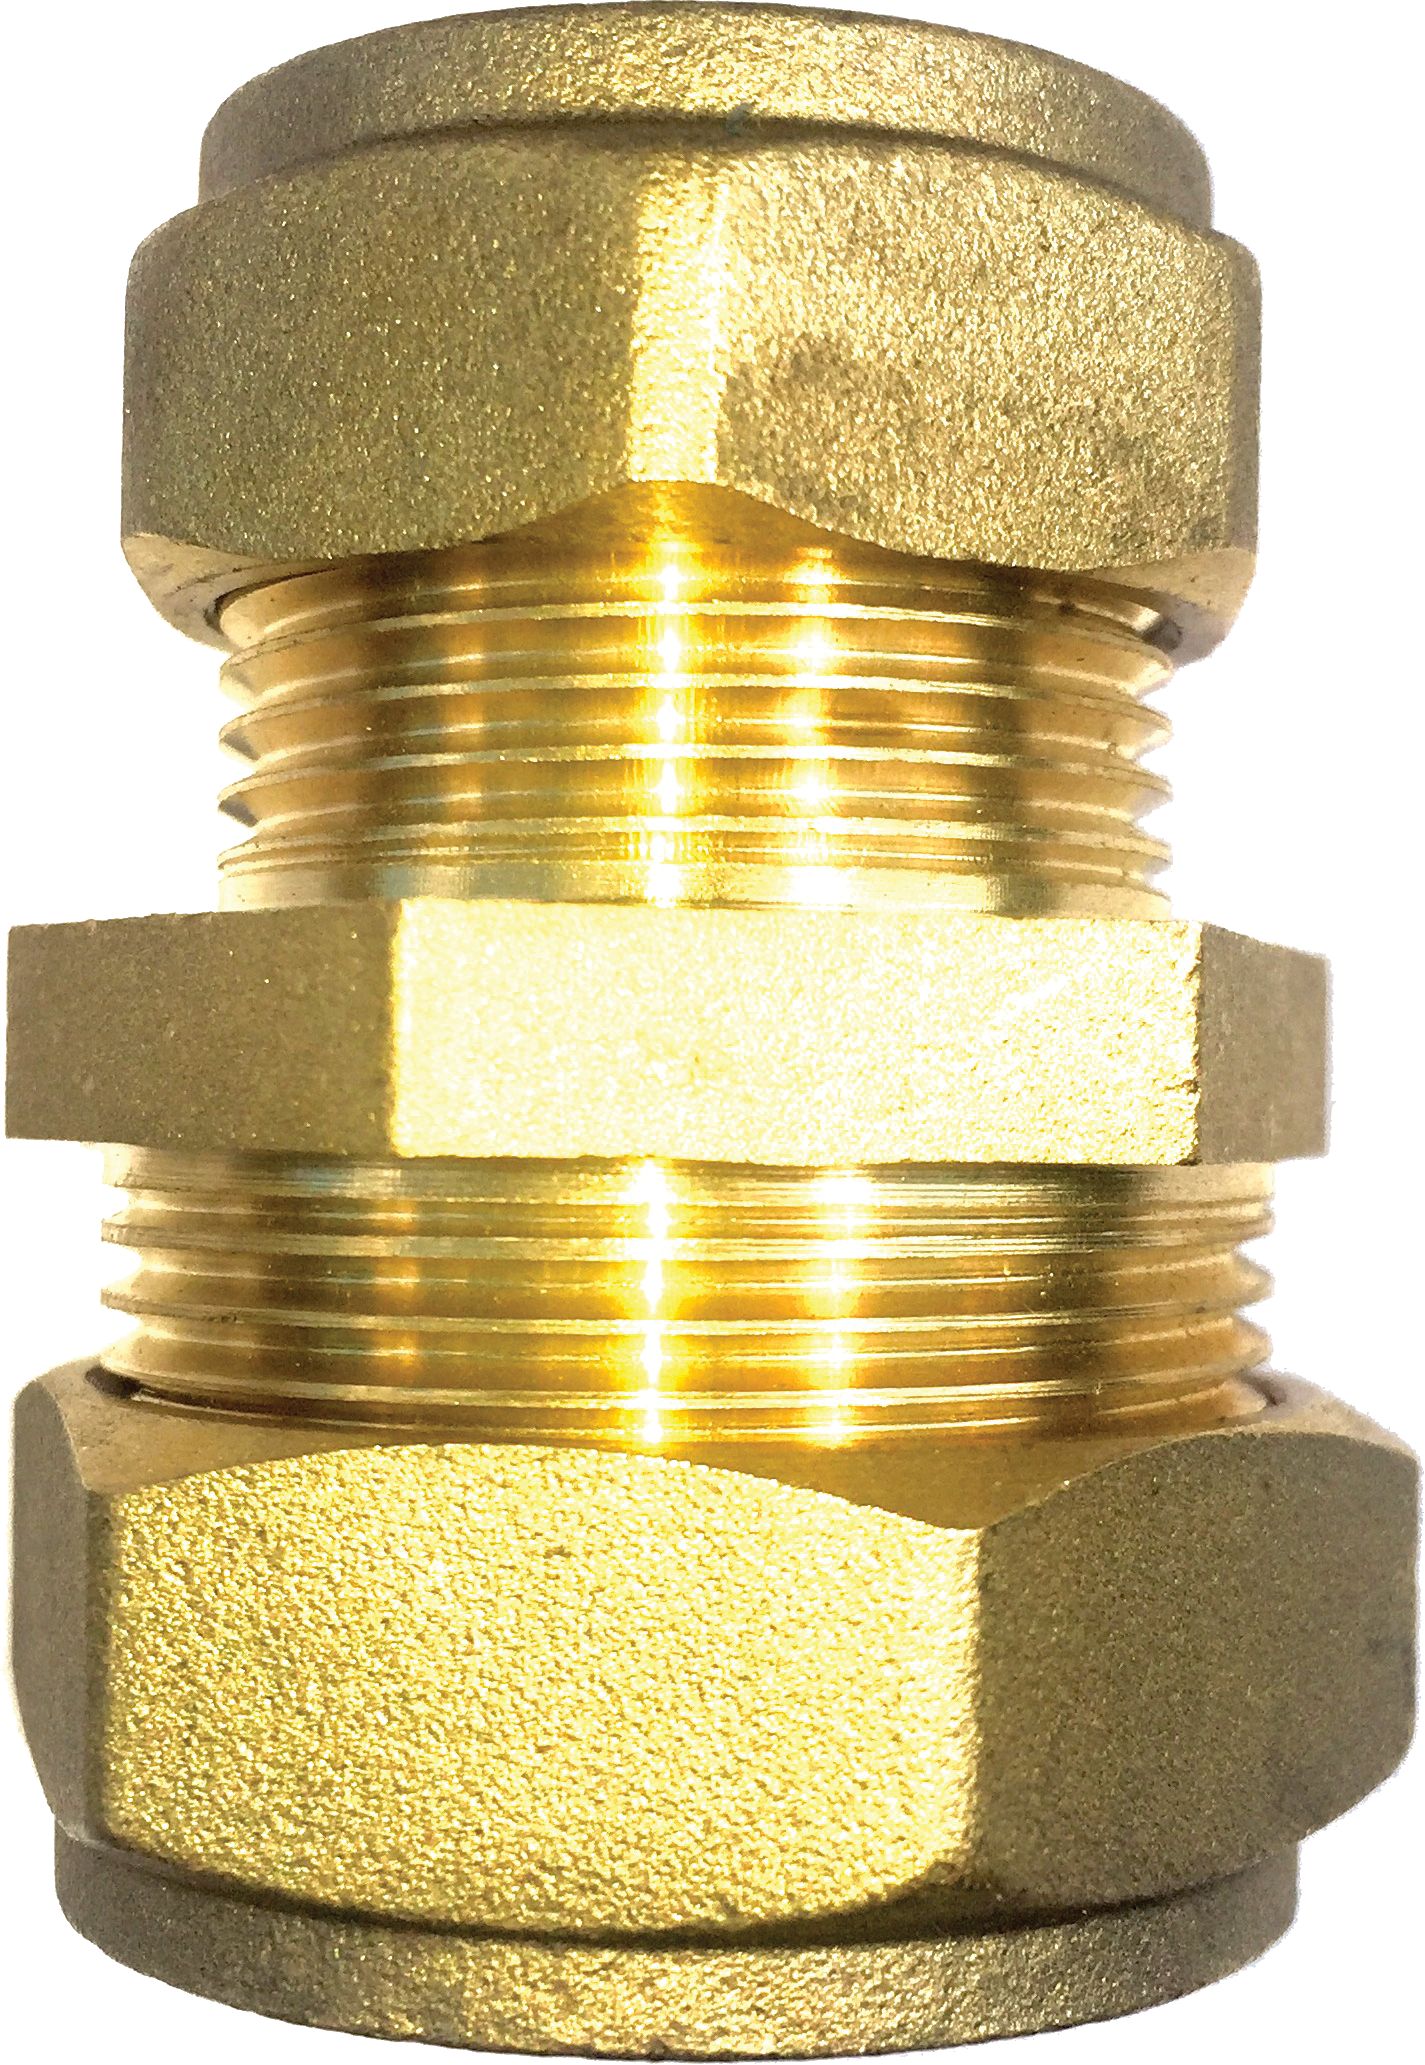 Primaflow Brass Compression Reducer Coupling - 28 X 22mm